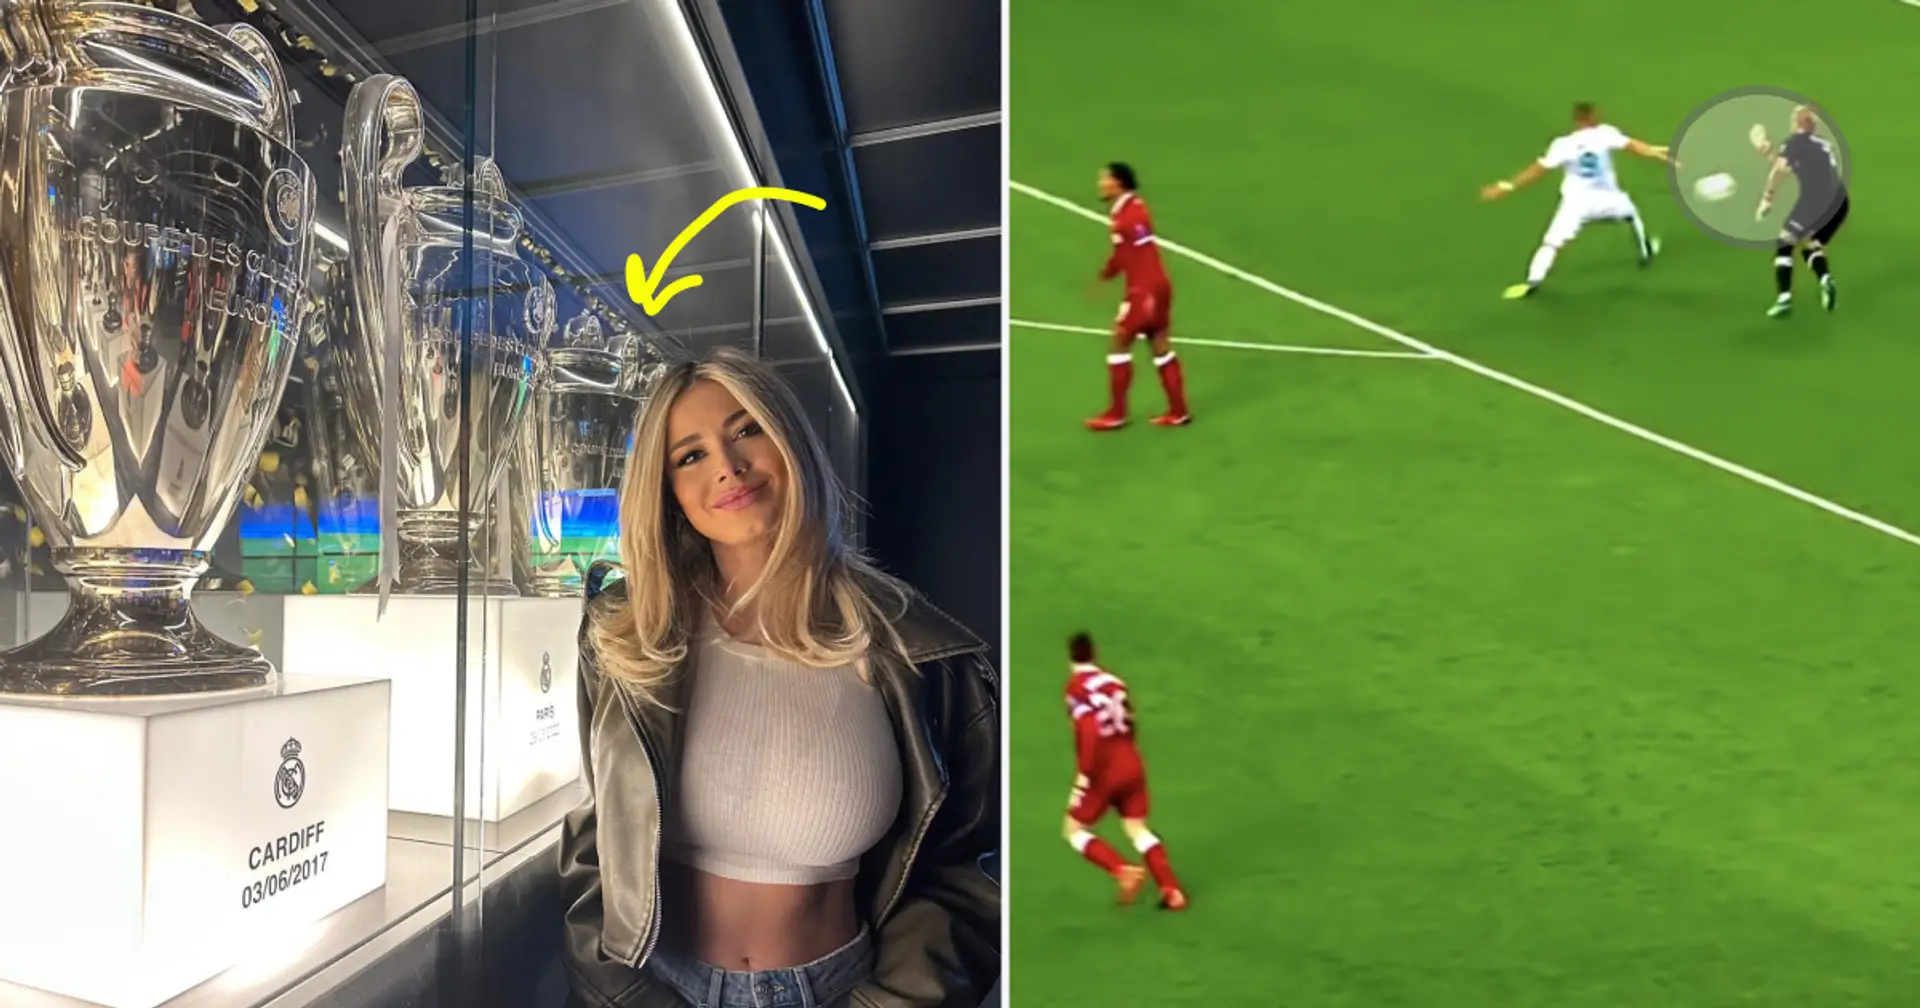 Spotted: Karius' girlfriend poses with Real Madrid's Champions League trophies — he 'handed' them one in 2018